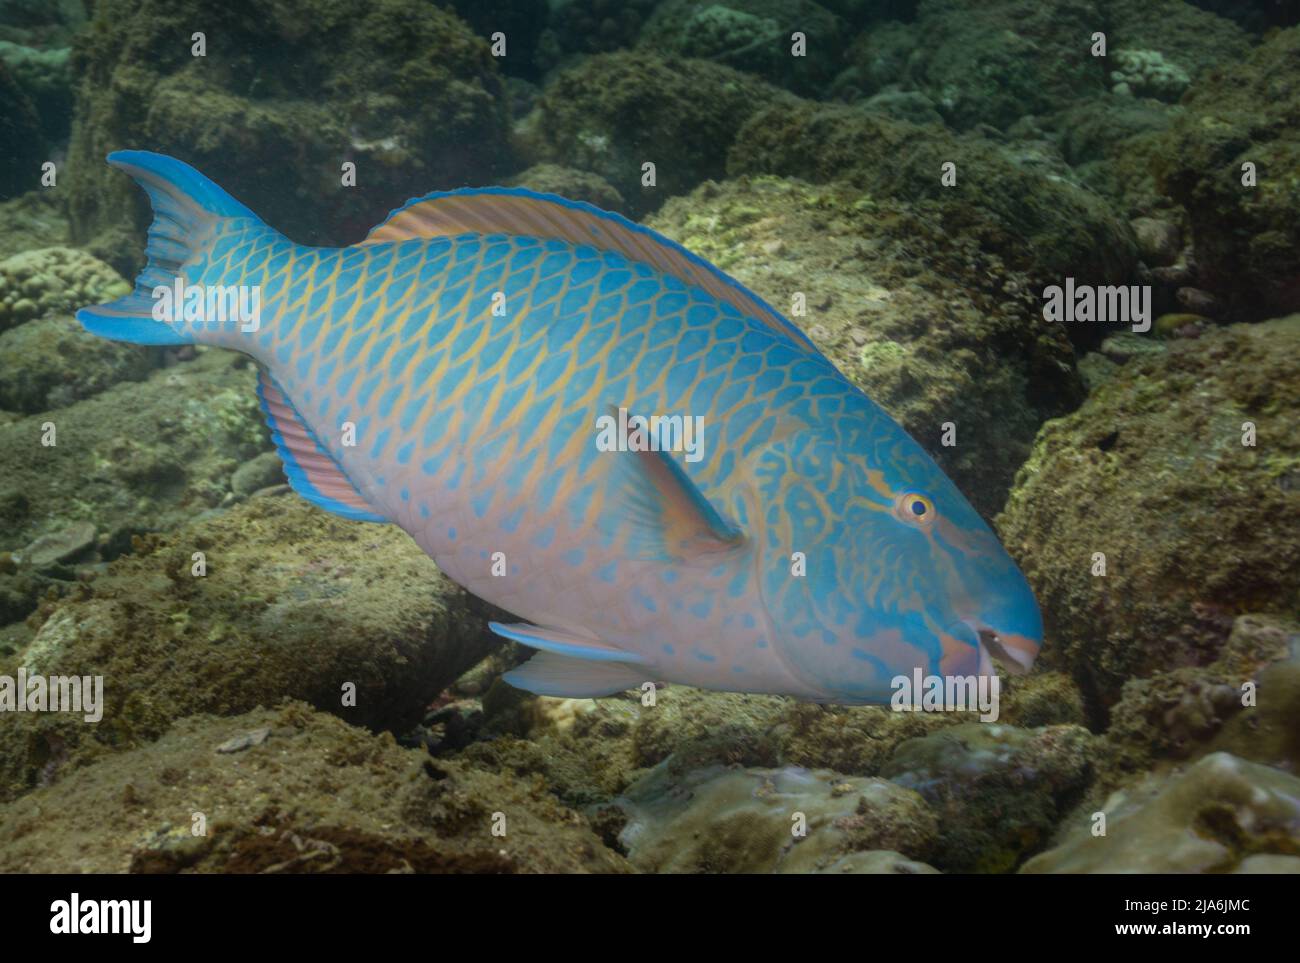 Underwater image of a Parrot Fish photographed during scuba diving in Netrani (Karnataka, India) Stock Photo